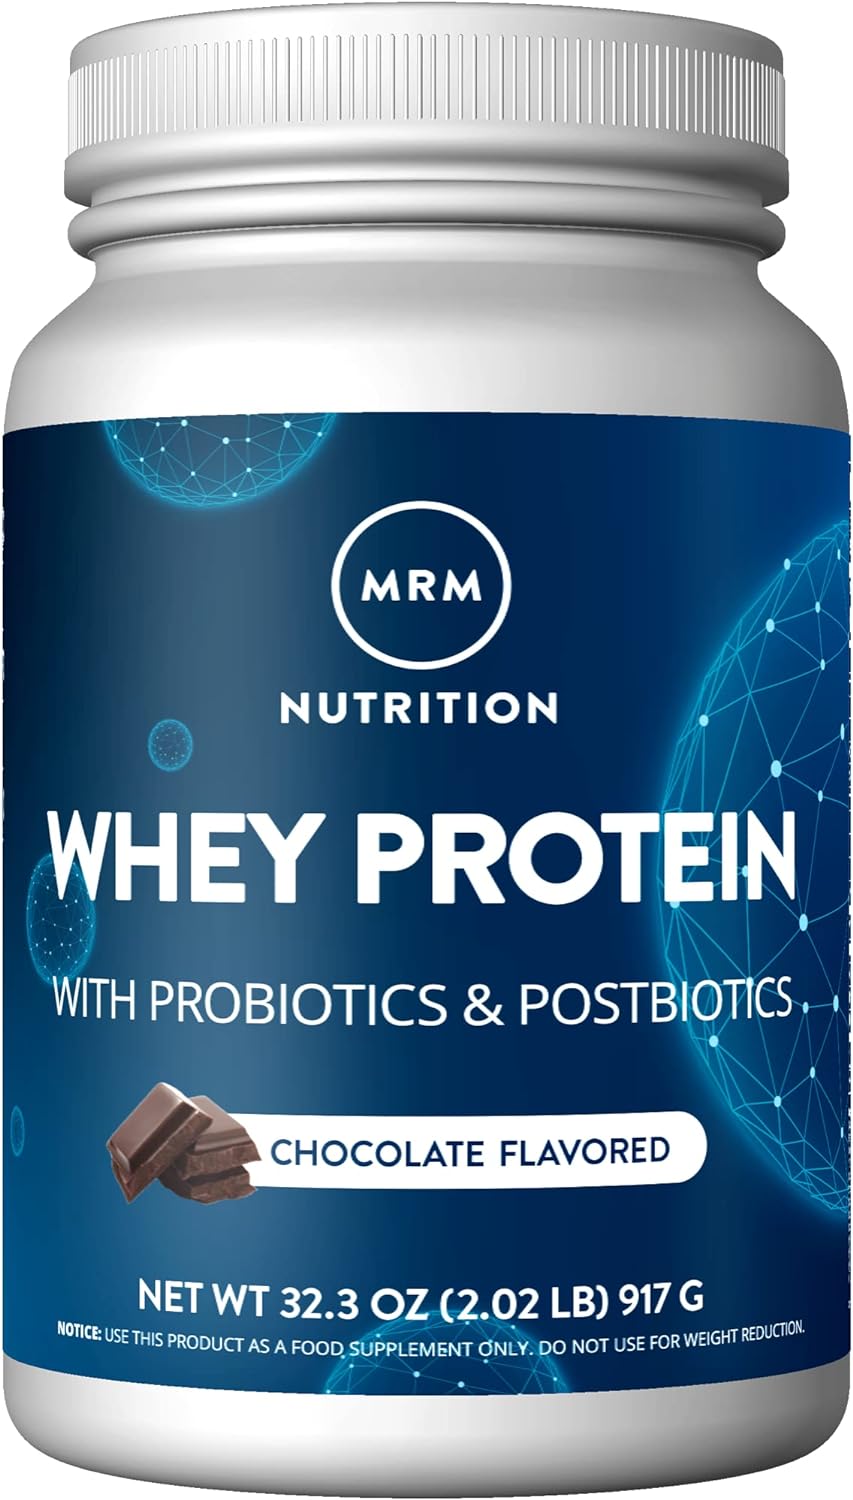 MRM Nutrition Whey Protein | Chocolate Flavored |18g Protein | with 2